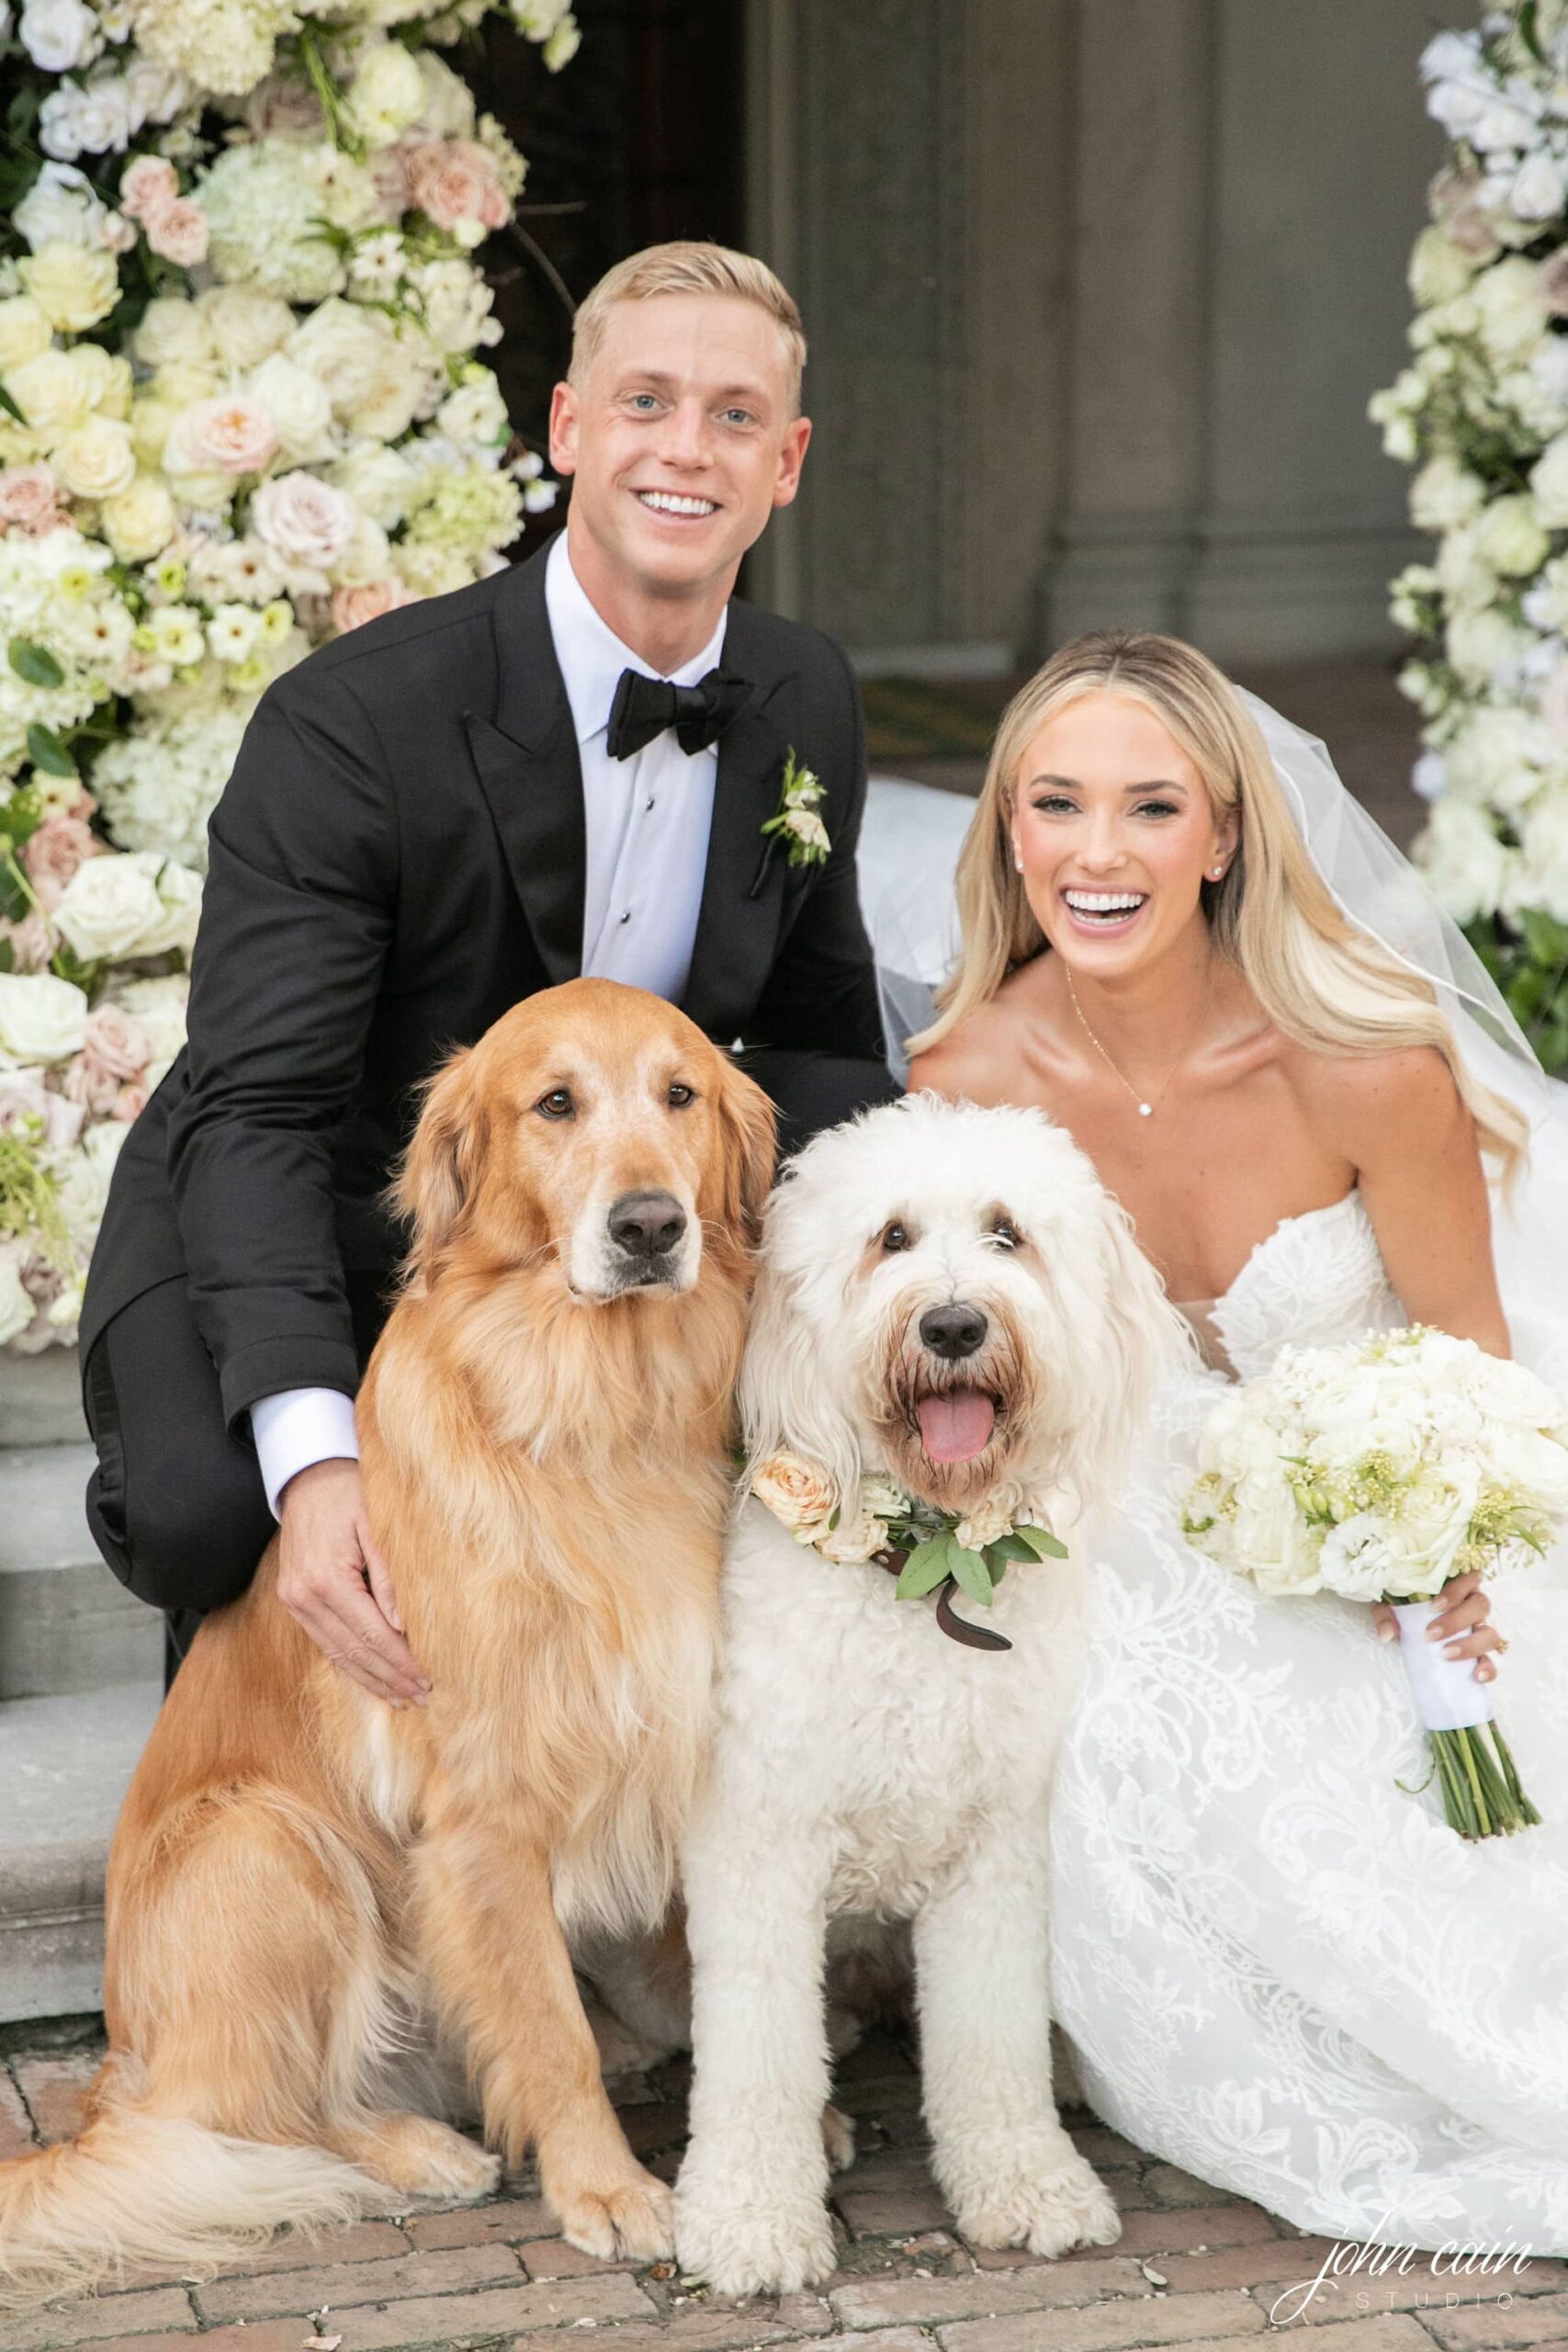 Lee and Emily's wedding photo with their two dogs